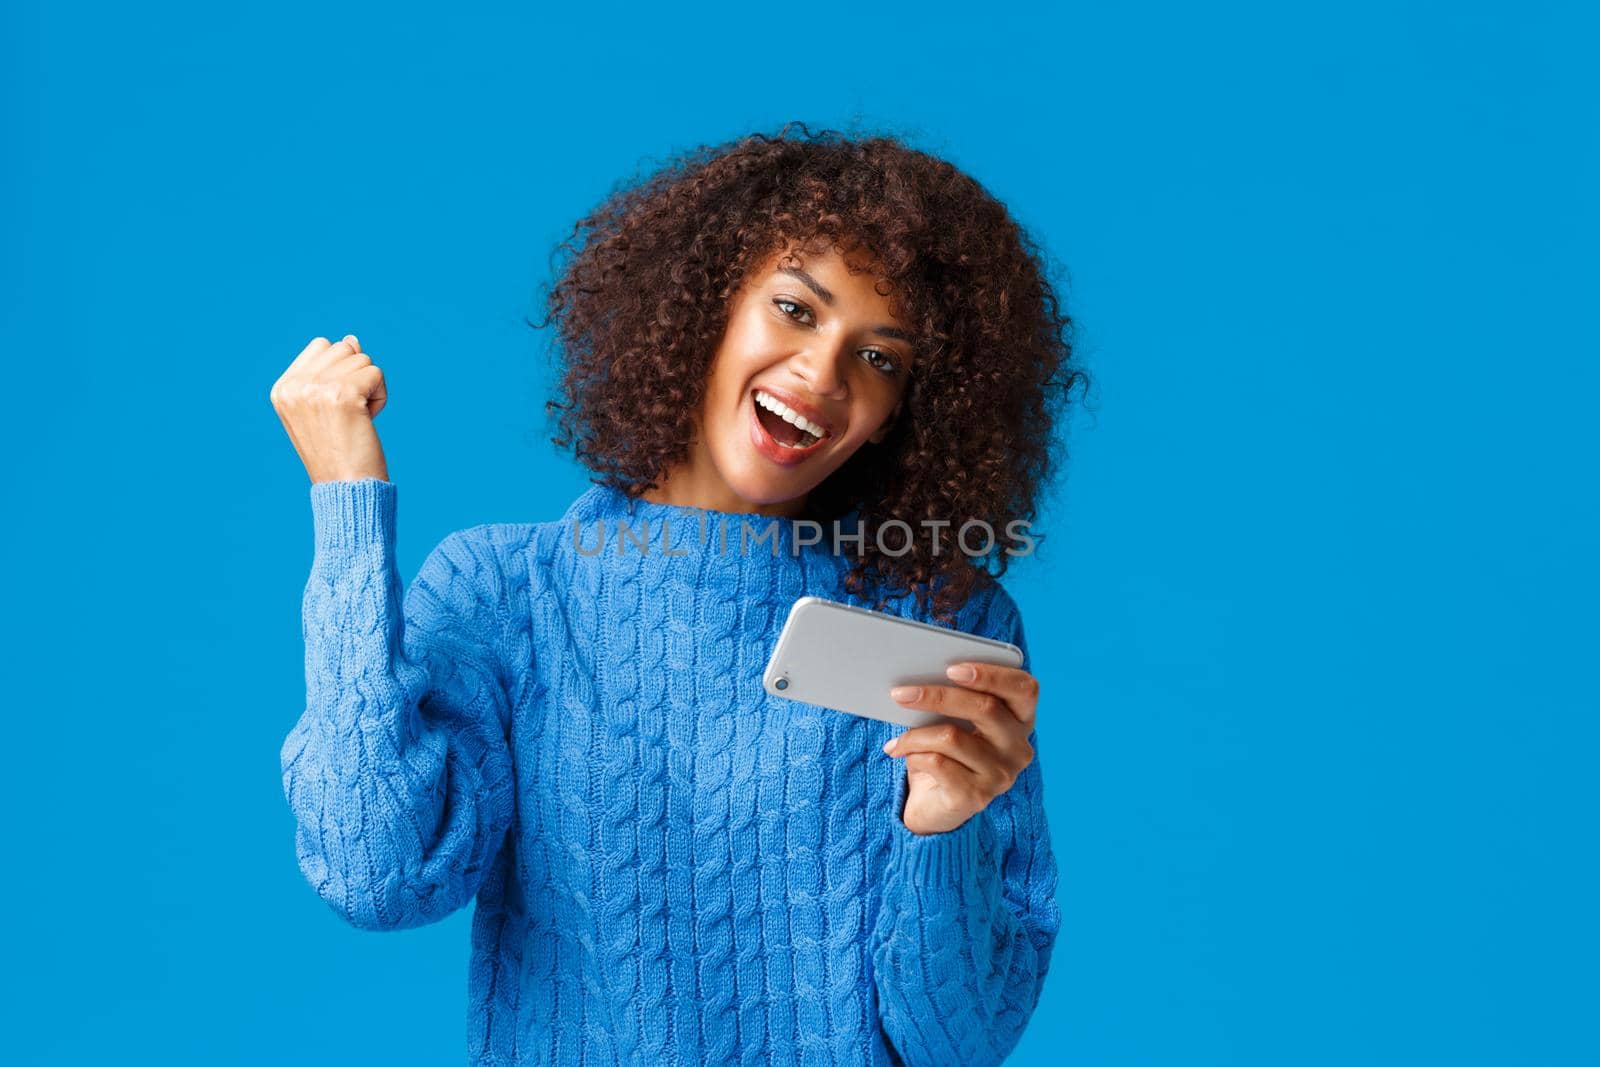 Excited happy lucky african-american woman passed level, finished race first in game, holding smartphone playing app, cheering, fist up like champion, celebrating victory, blue background.